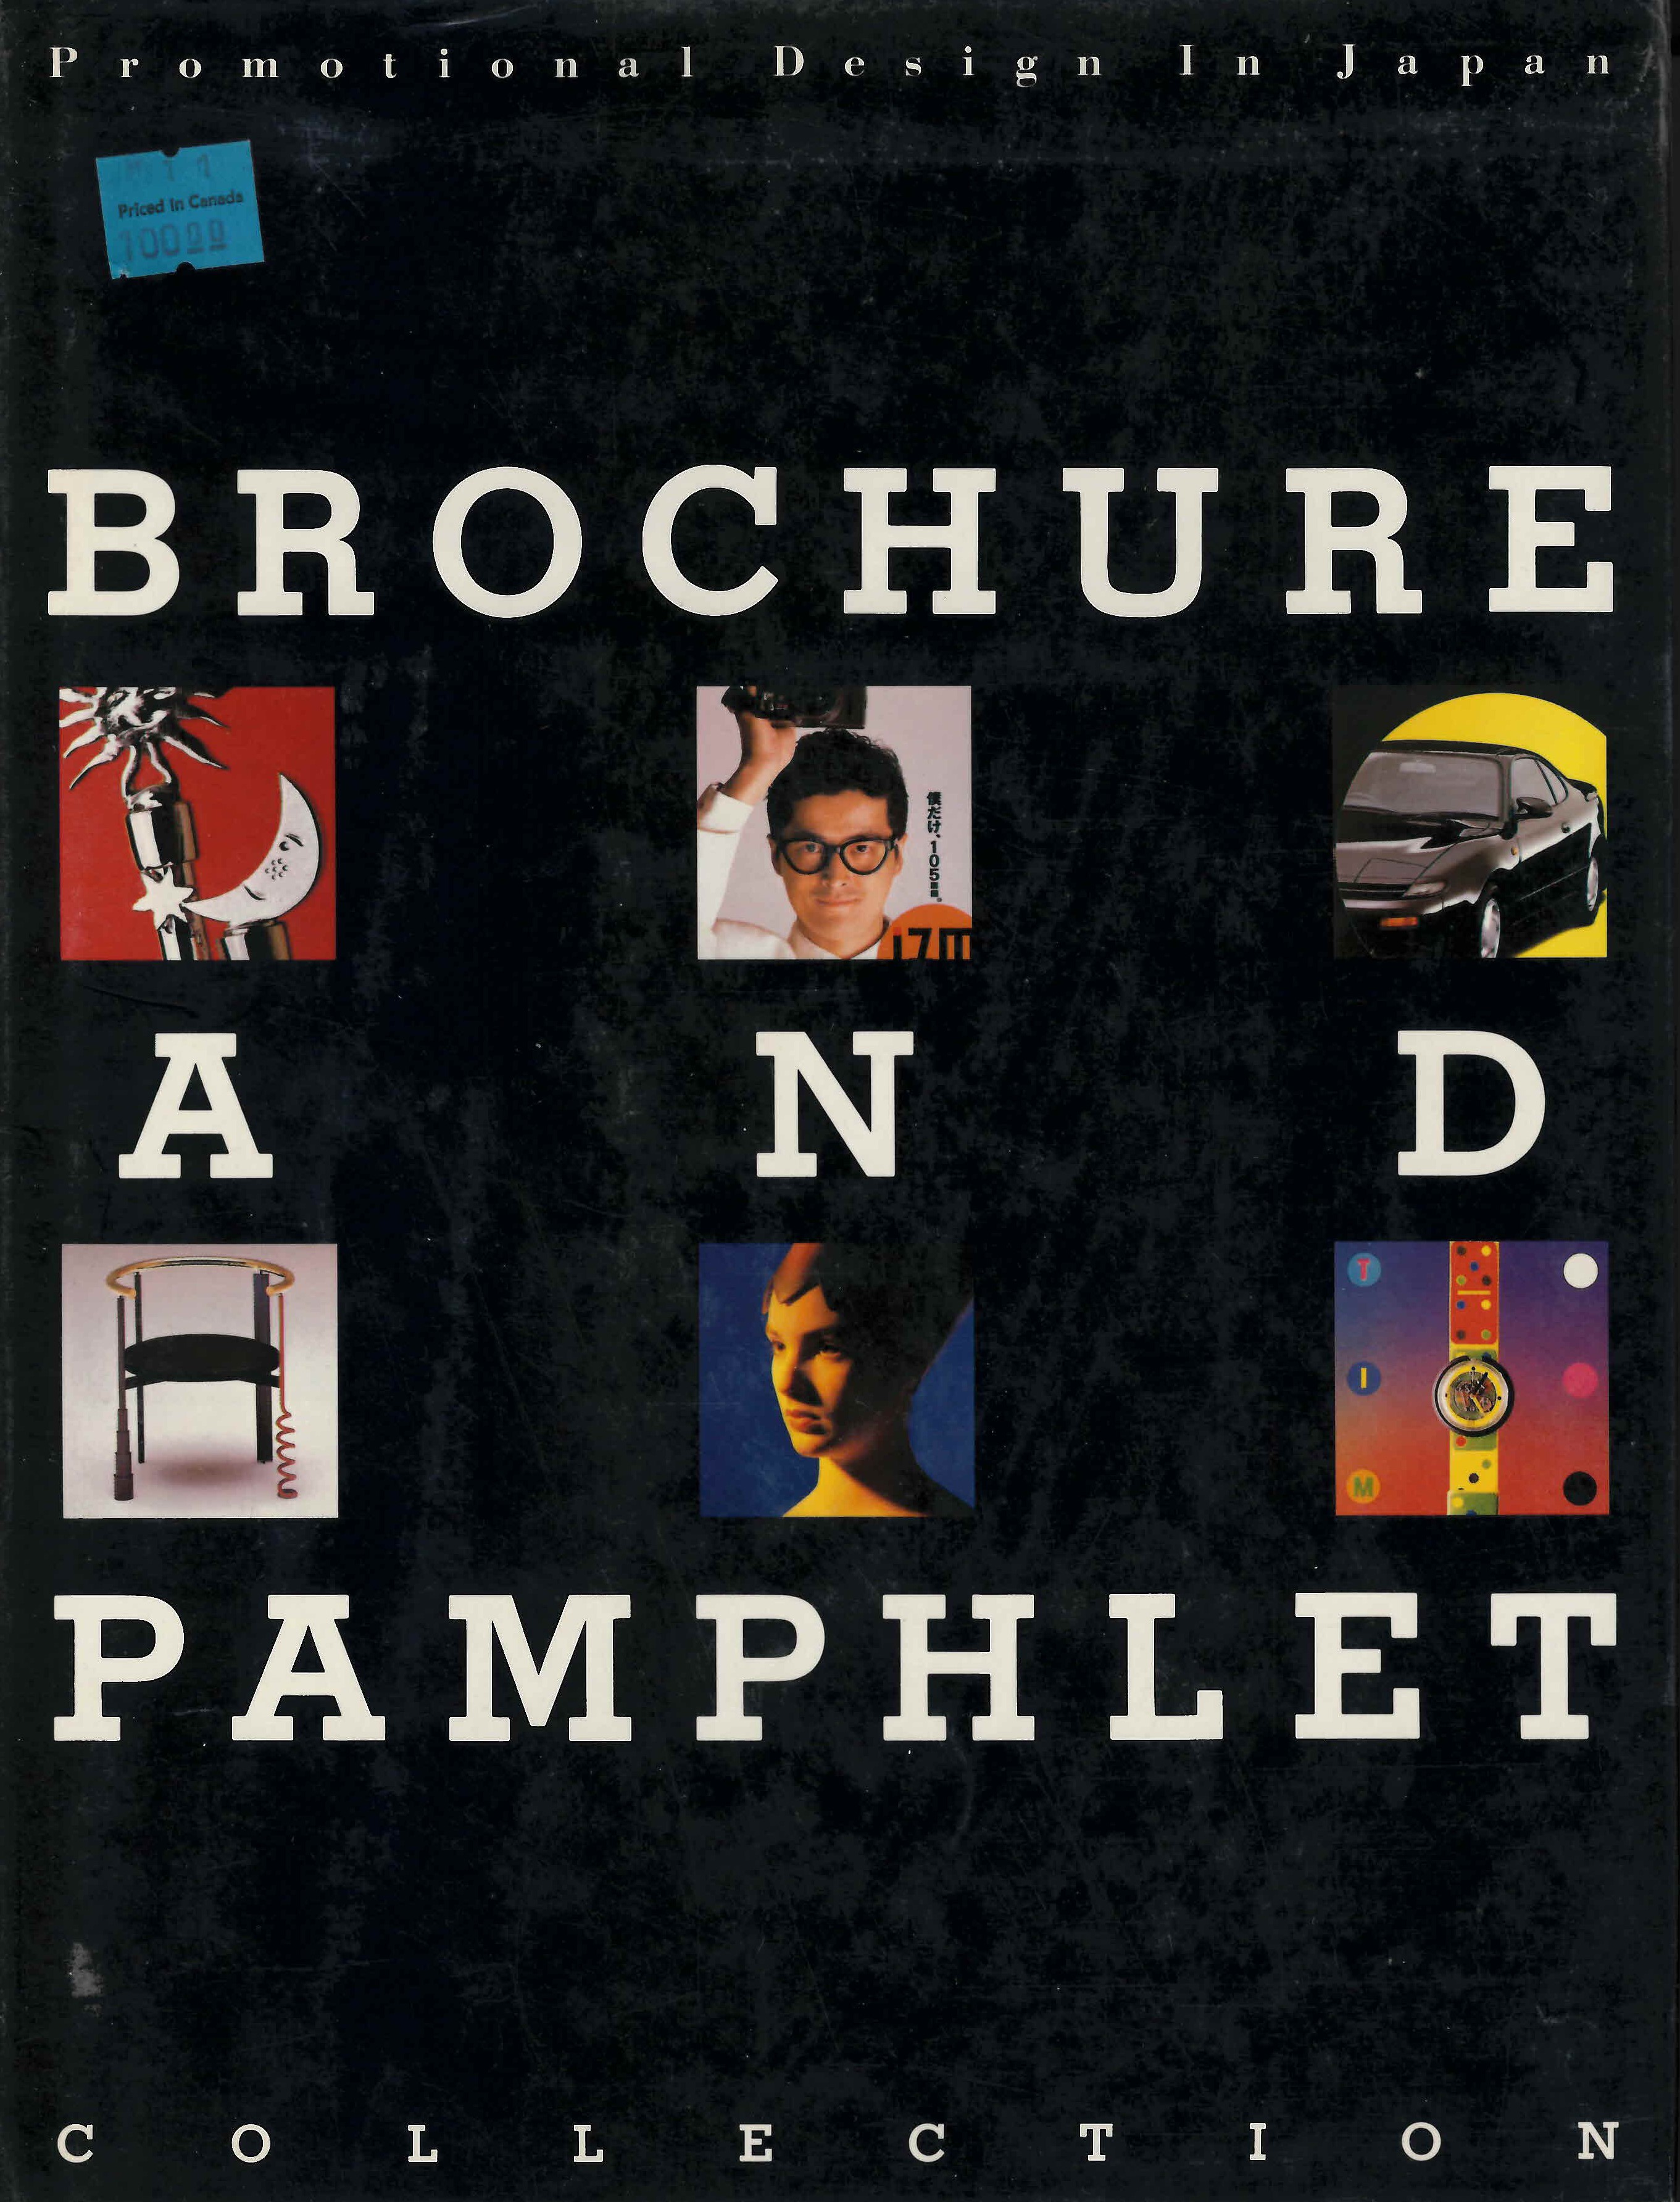 A brochure and pamphet collection